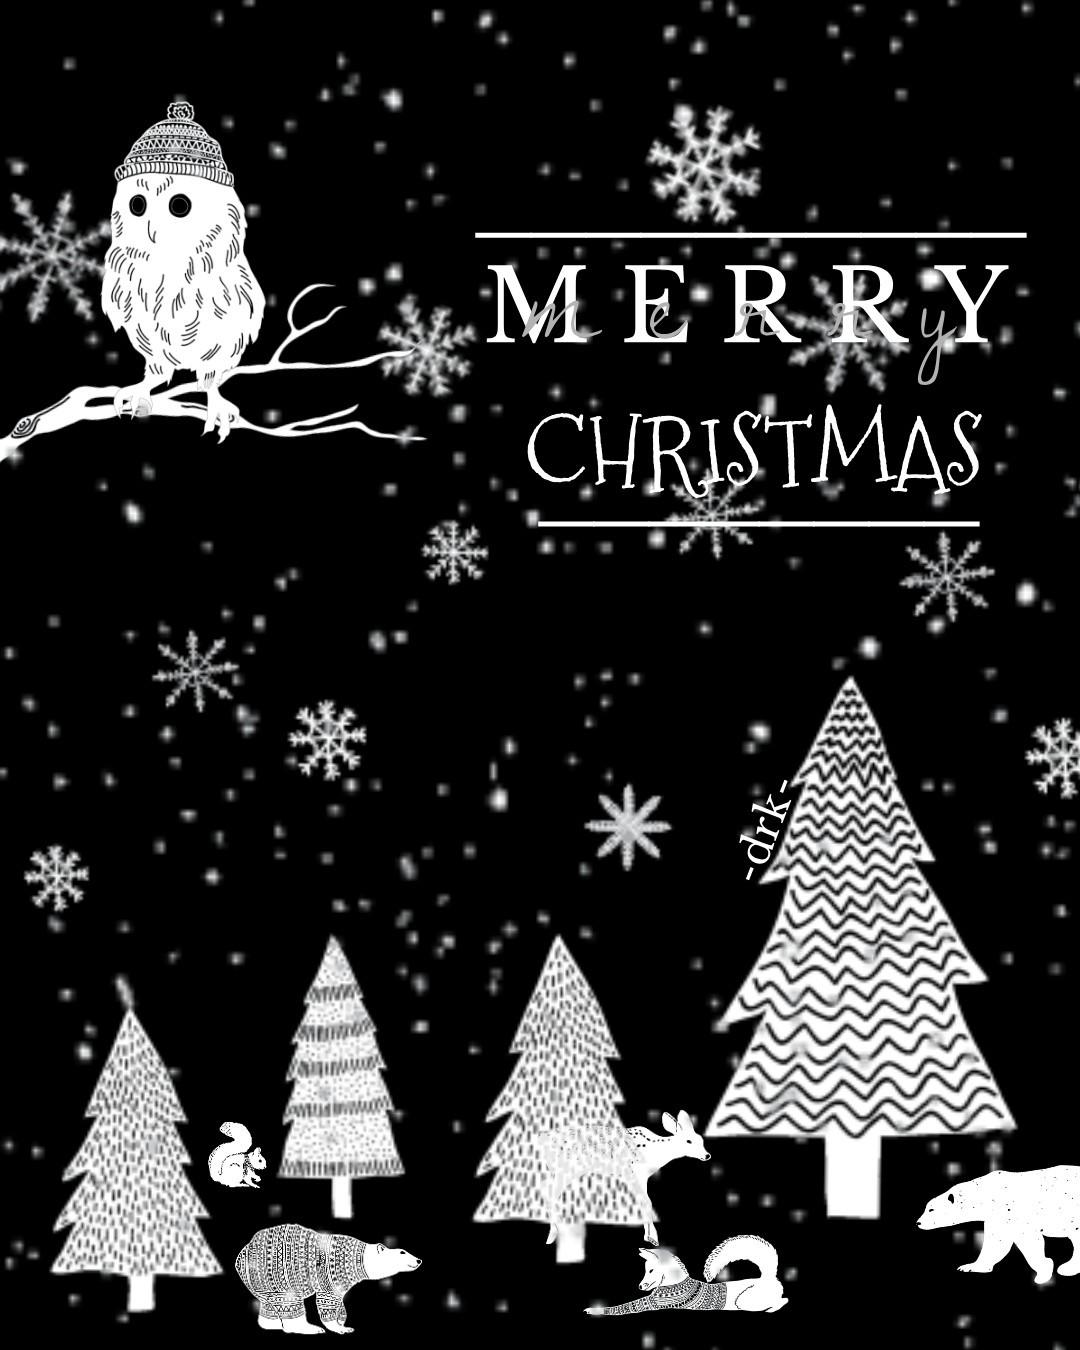 🦉12/25/2020🦉
Merry Christmas everyone ! have a great day :)